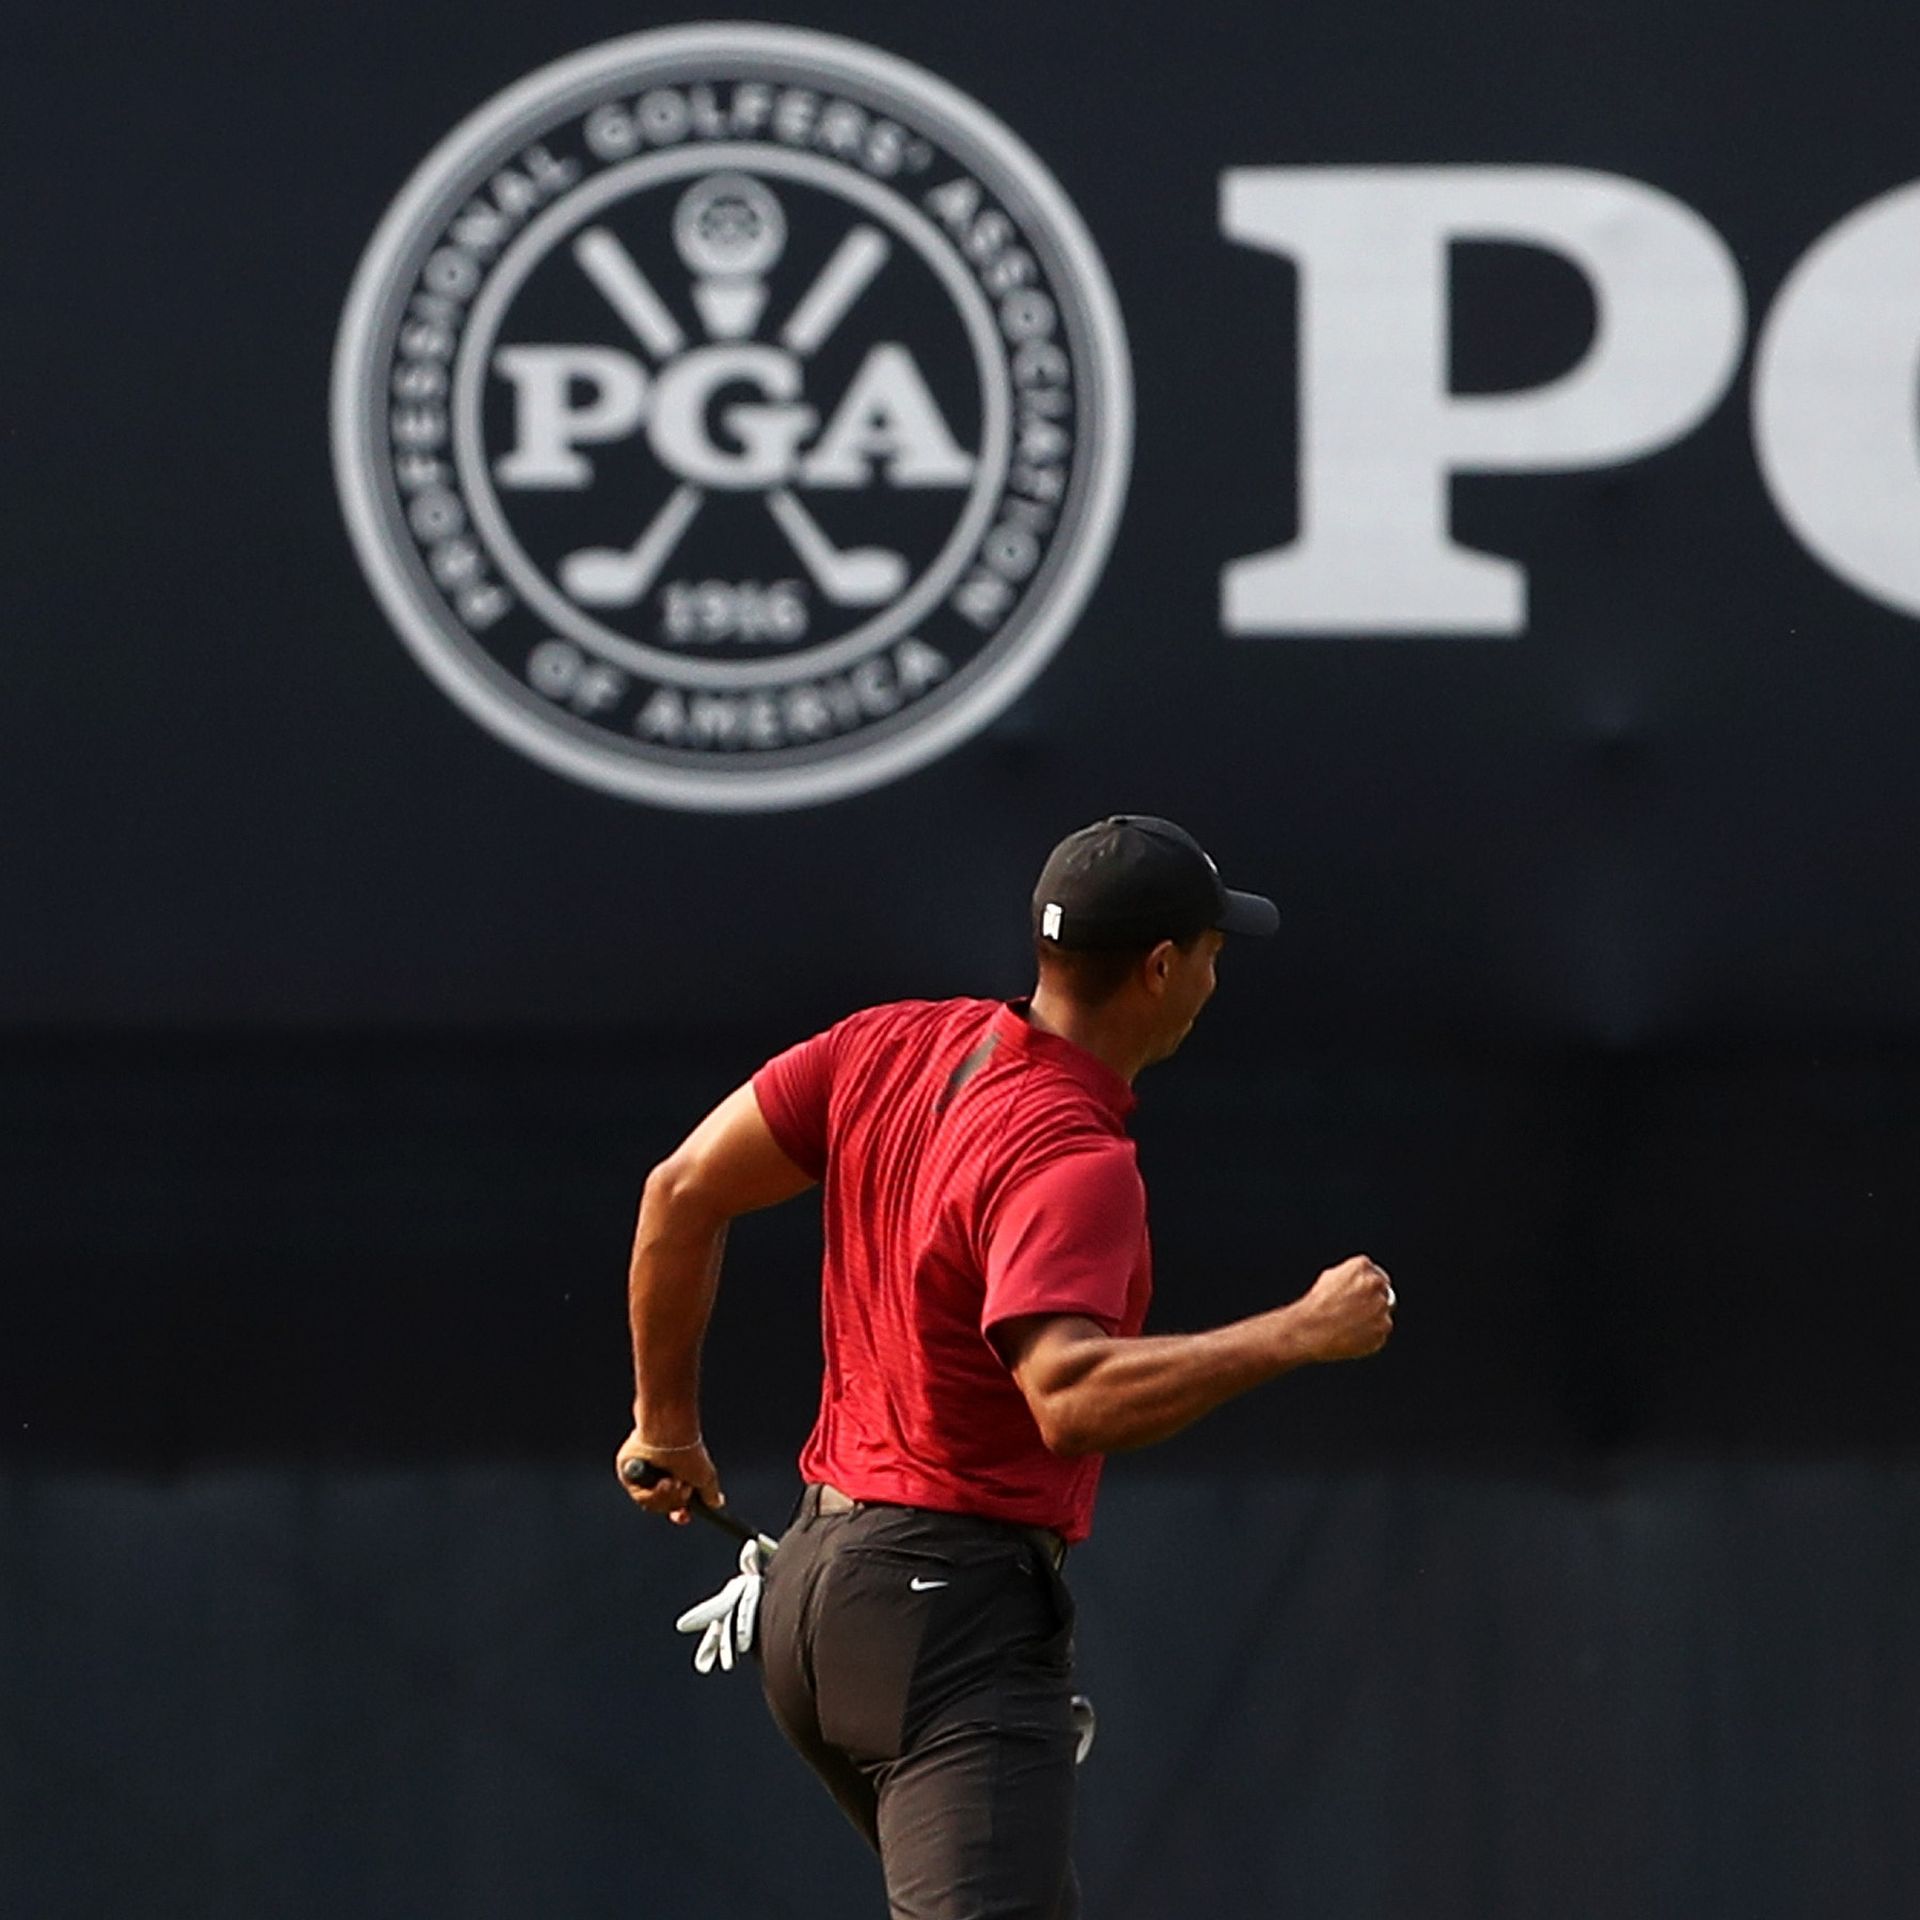 PGA Tour member Tiger Woods celebrates a putt in front of a PGA Tour sign.